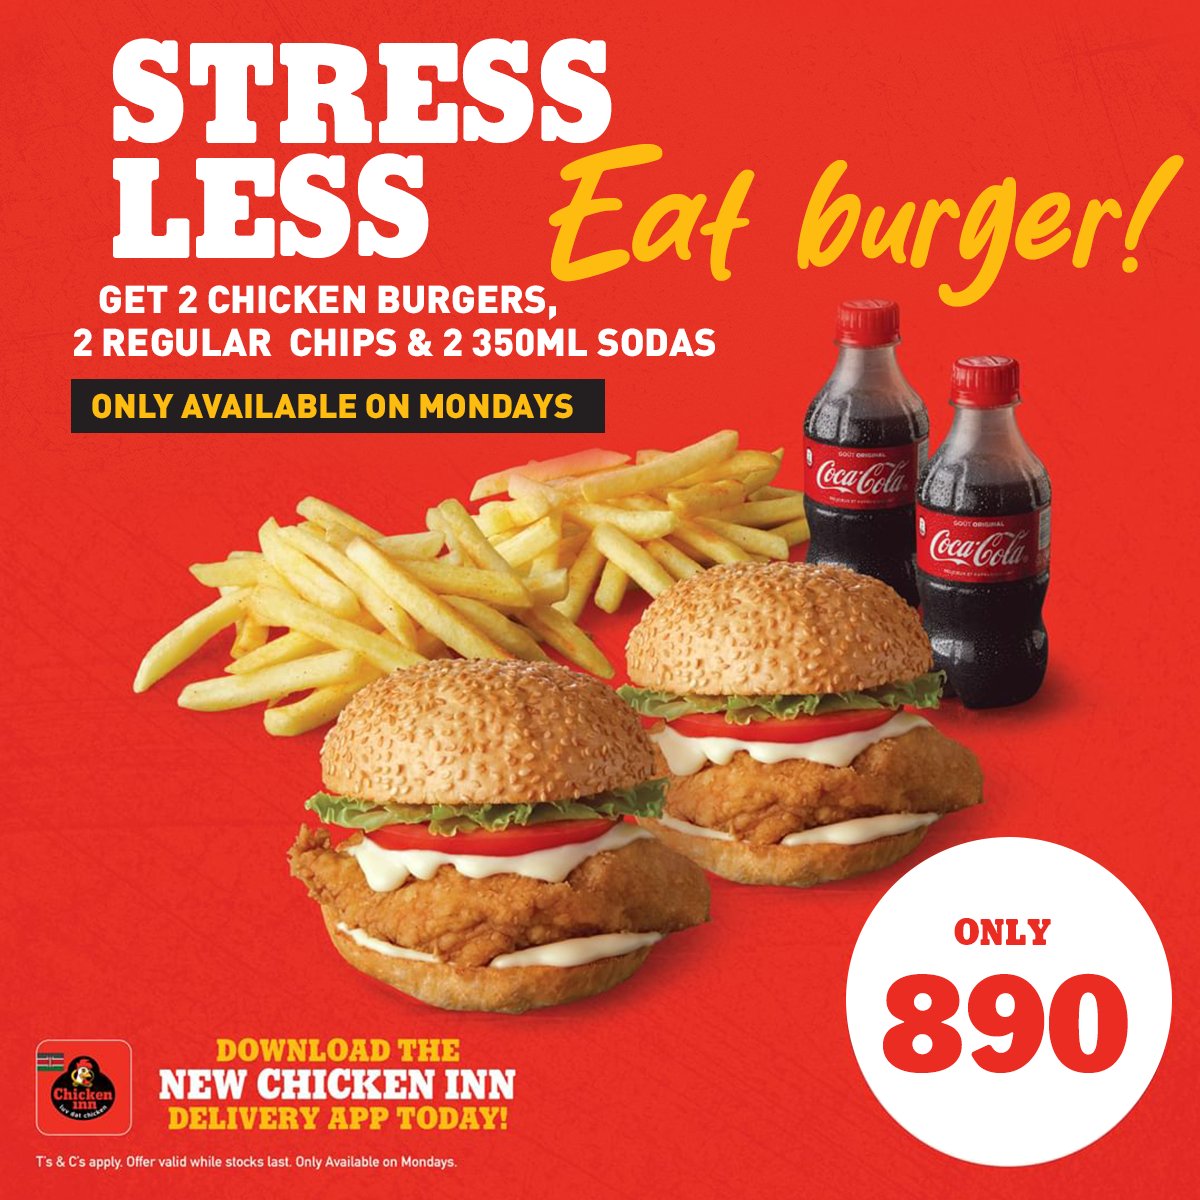 Feeling overwhelmed hii wiki?
Take a break u-refuel with a delicious meal from Chicken Inn Kenya.
Ona hii 2 Chicken Burgers, Chips & Sodas at Kes 890 bob.
#InaHappen #InnTheMoment #LuvDatChicken